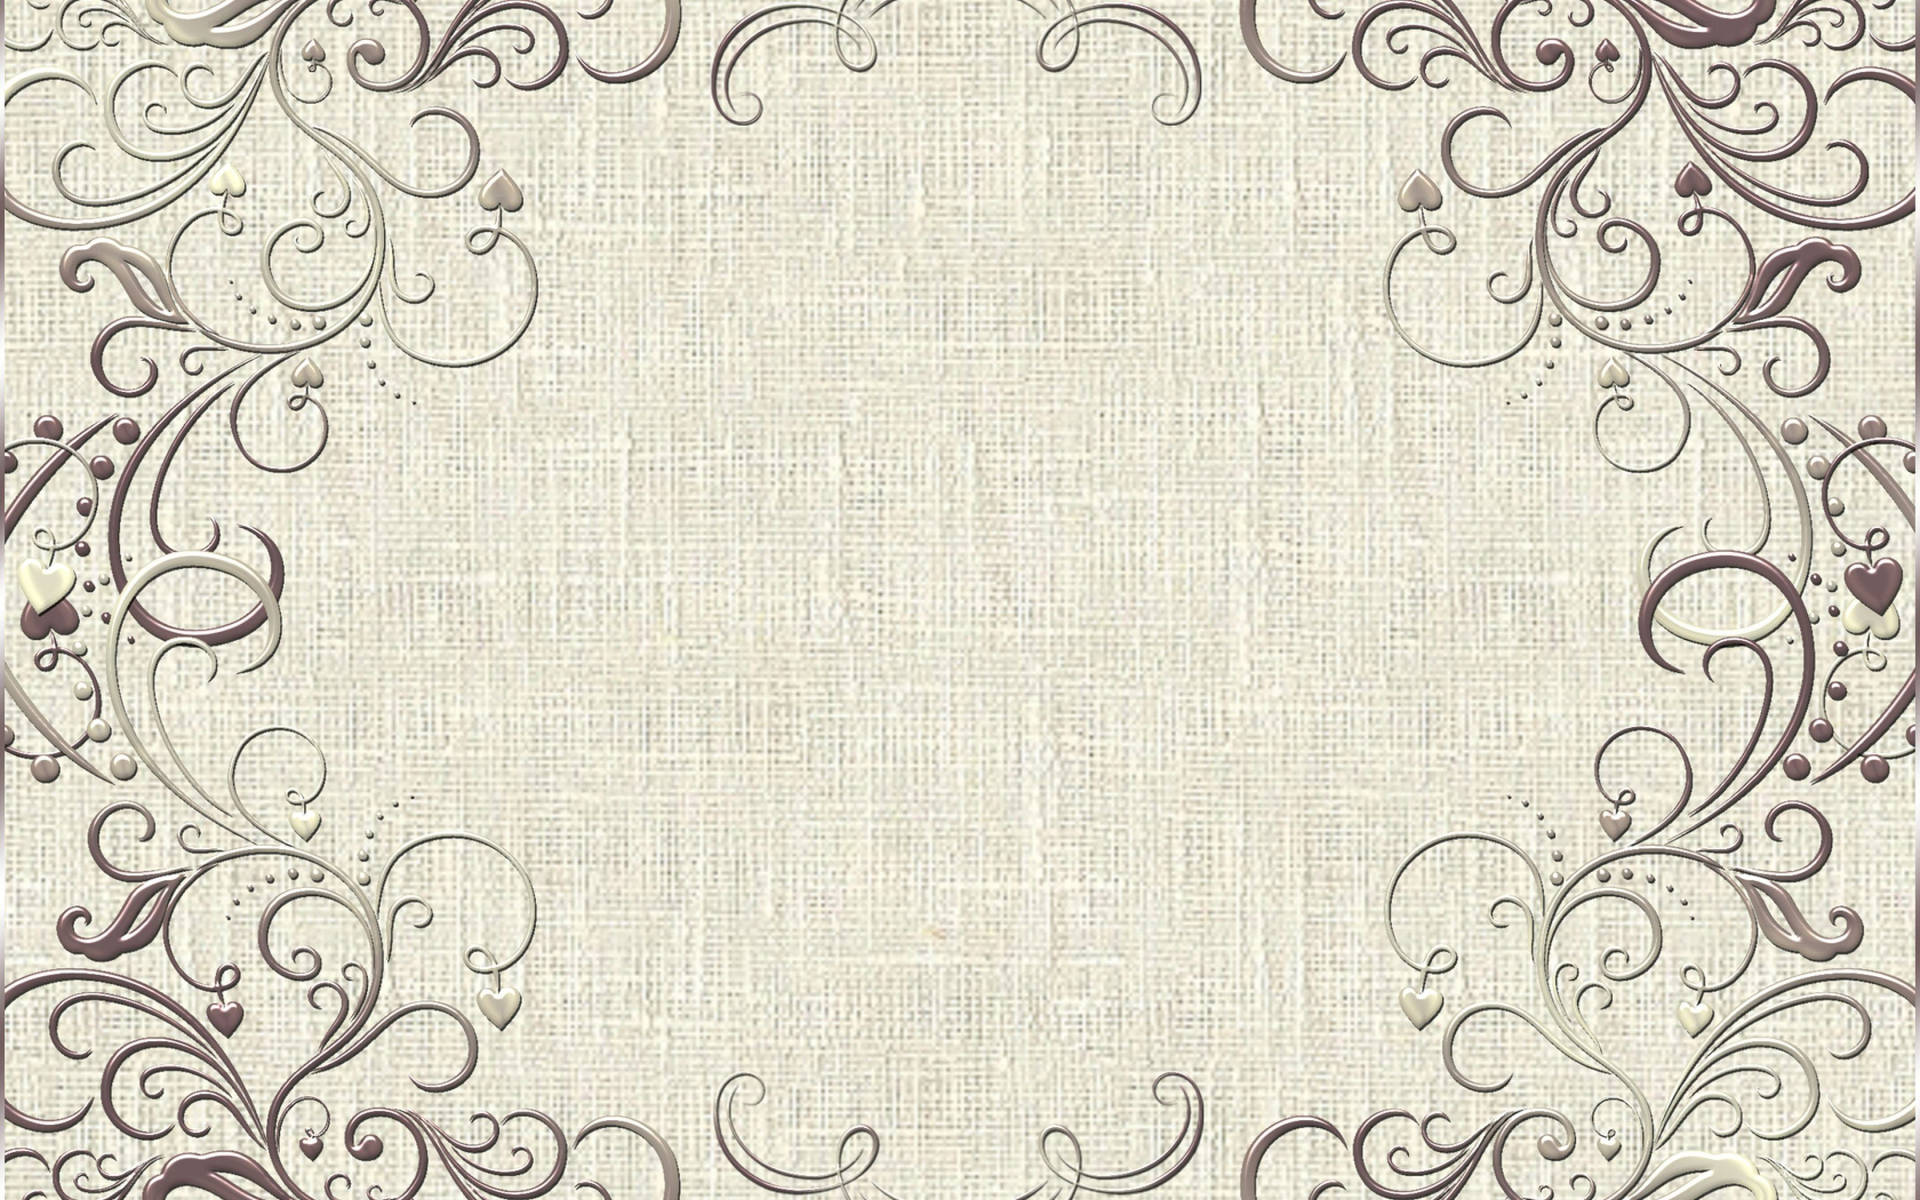 Old-school never goes out of style - Vintage border frame Wallpaper